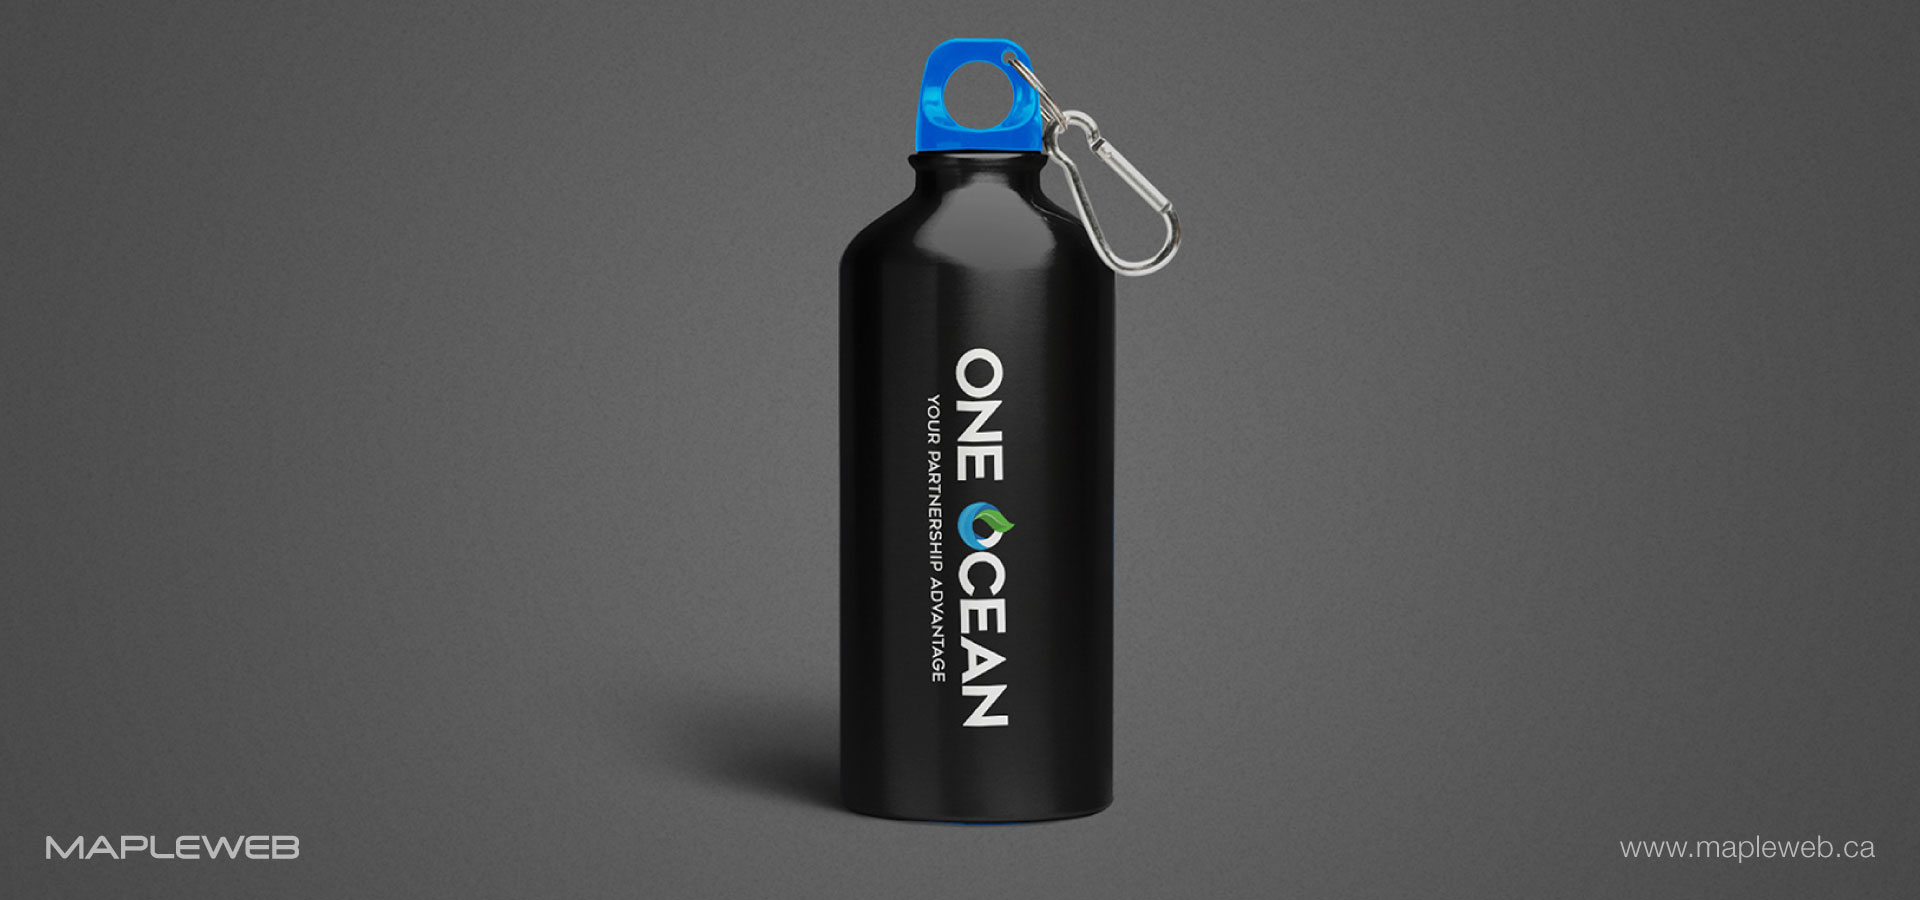 one-ocean-brand-logo-design-by-mapleweb-vancouver-canada-water-bottle-mock